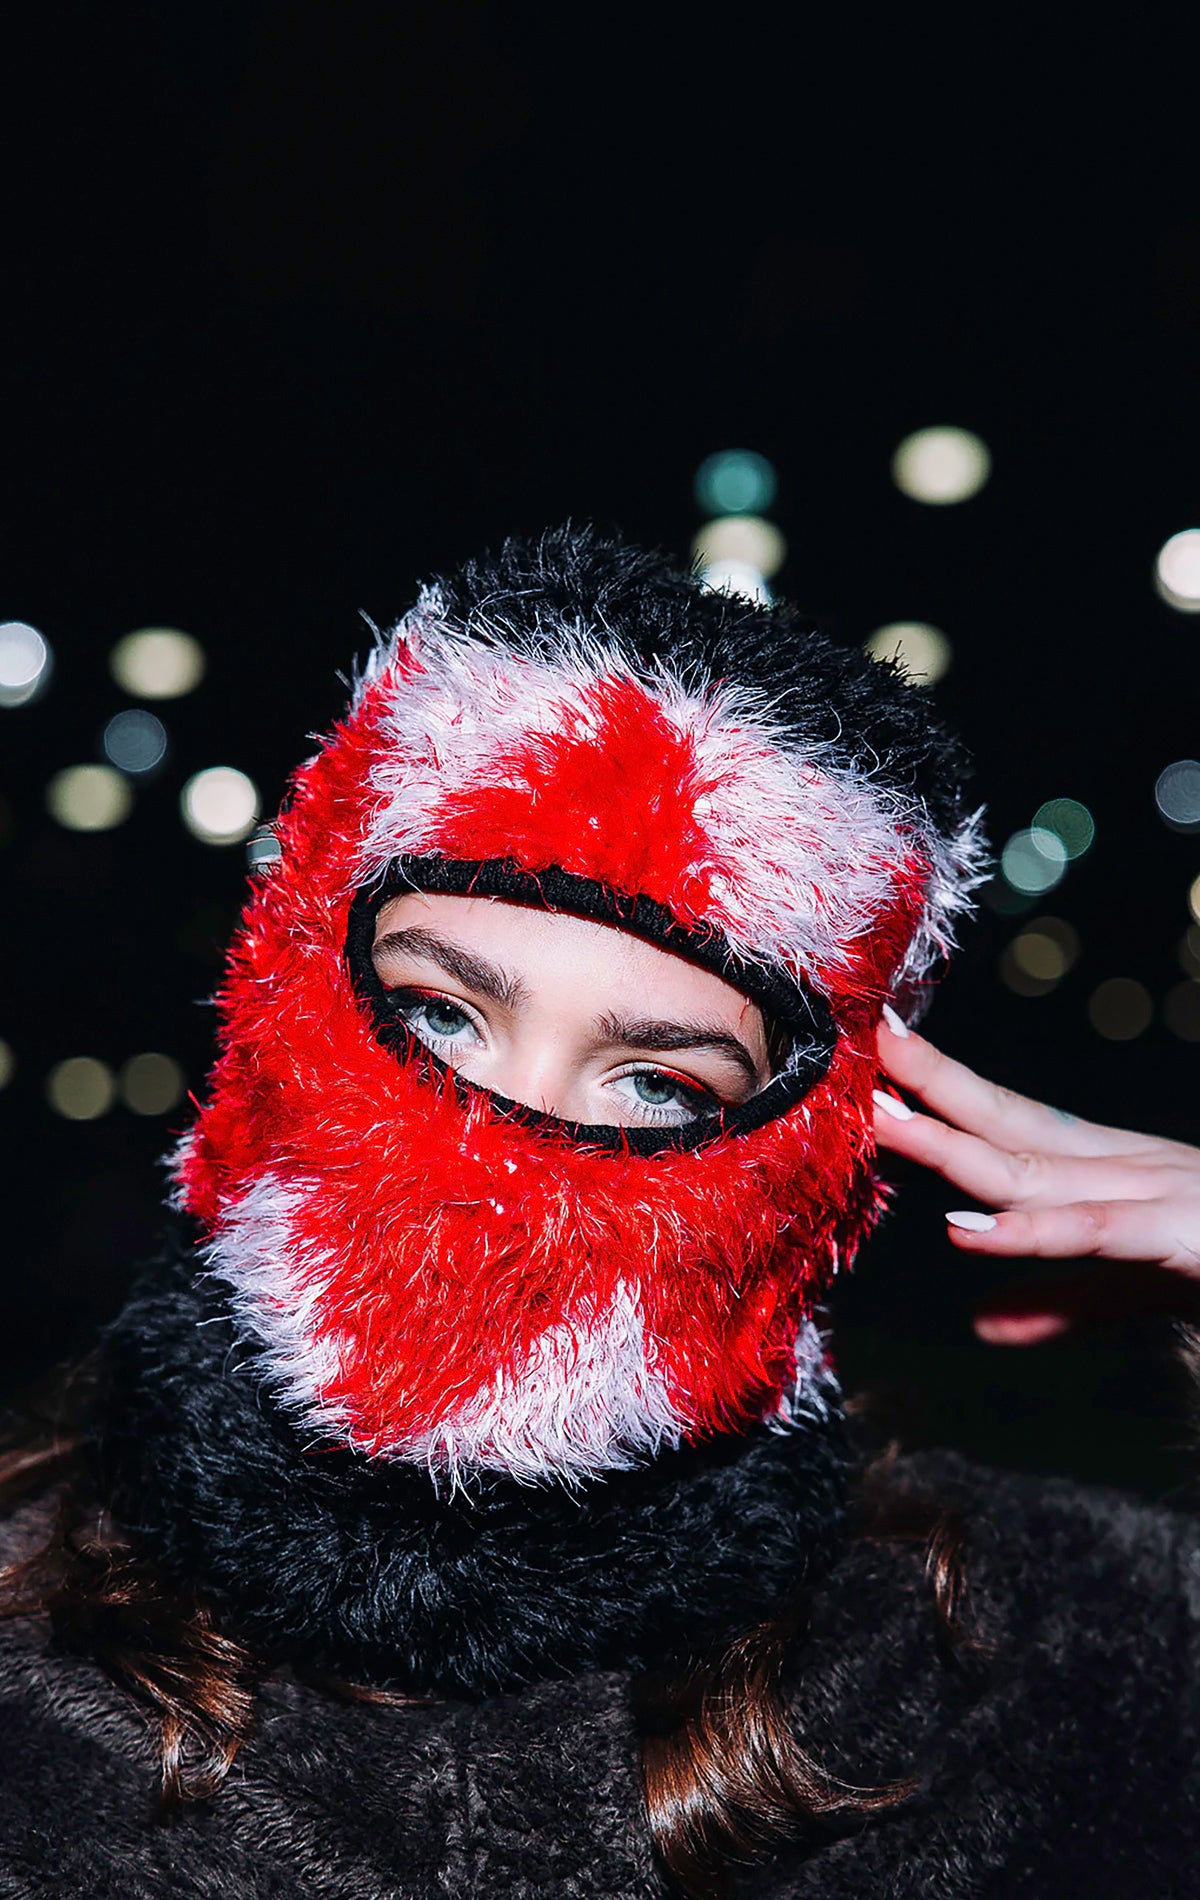 Embrace warmth and style while hitting the slopes with this limited-edition cozy ski mask, crafted from a soft and fuzzy fabric.